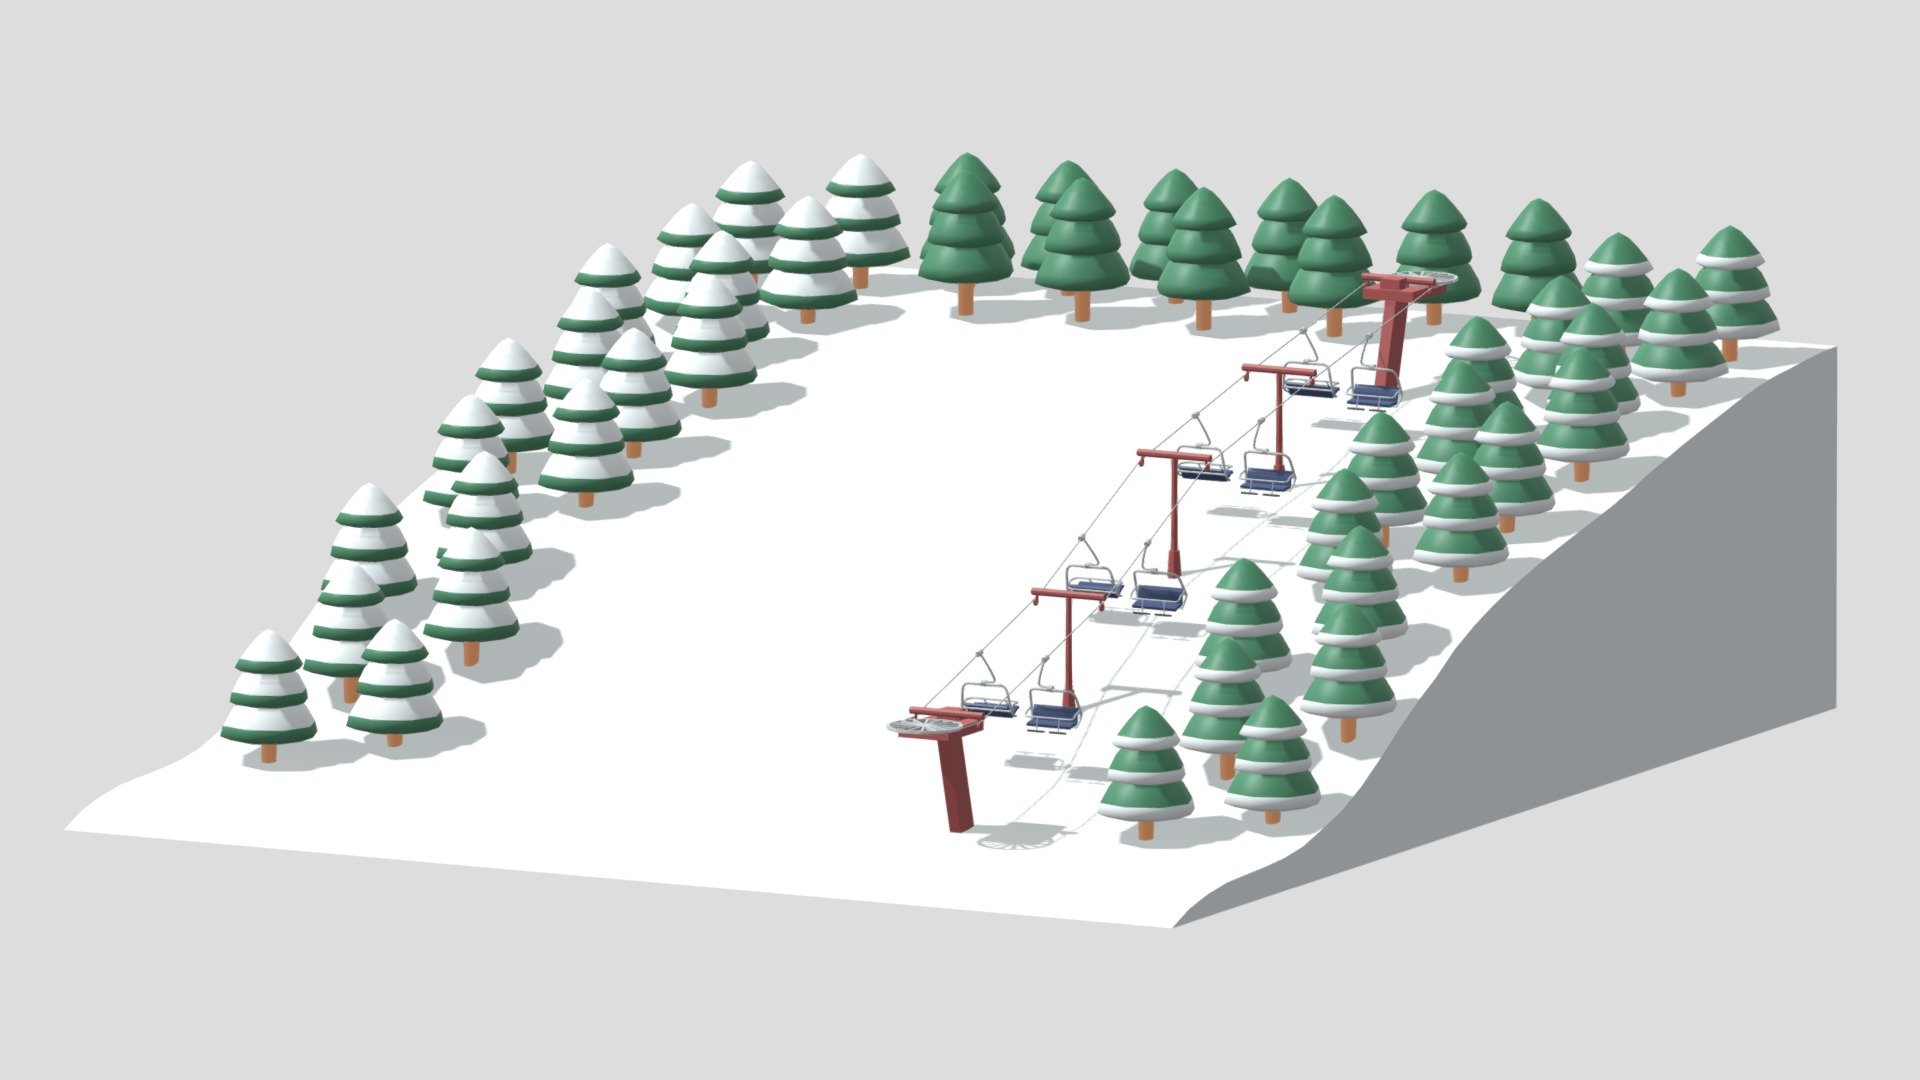 -Ski Slope Lift Mountain Pack.

-This product contains 66 objects.

-Total vert: 18,206 poly: 15,797.

-This product was created in Blender 3.0.

-Formats: blend, fbx, obj, c4d, dae, abc, glb, stl, unity.

-We hope you enjoy this model.

-Thank you 3d model